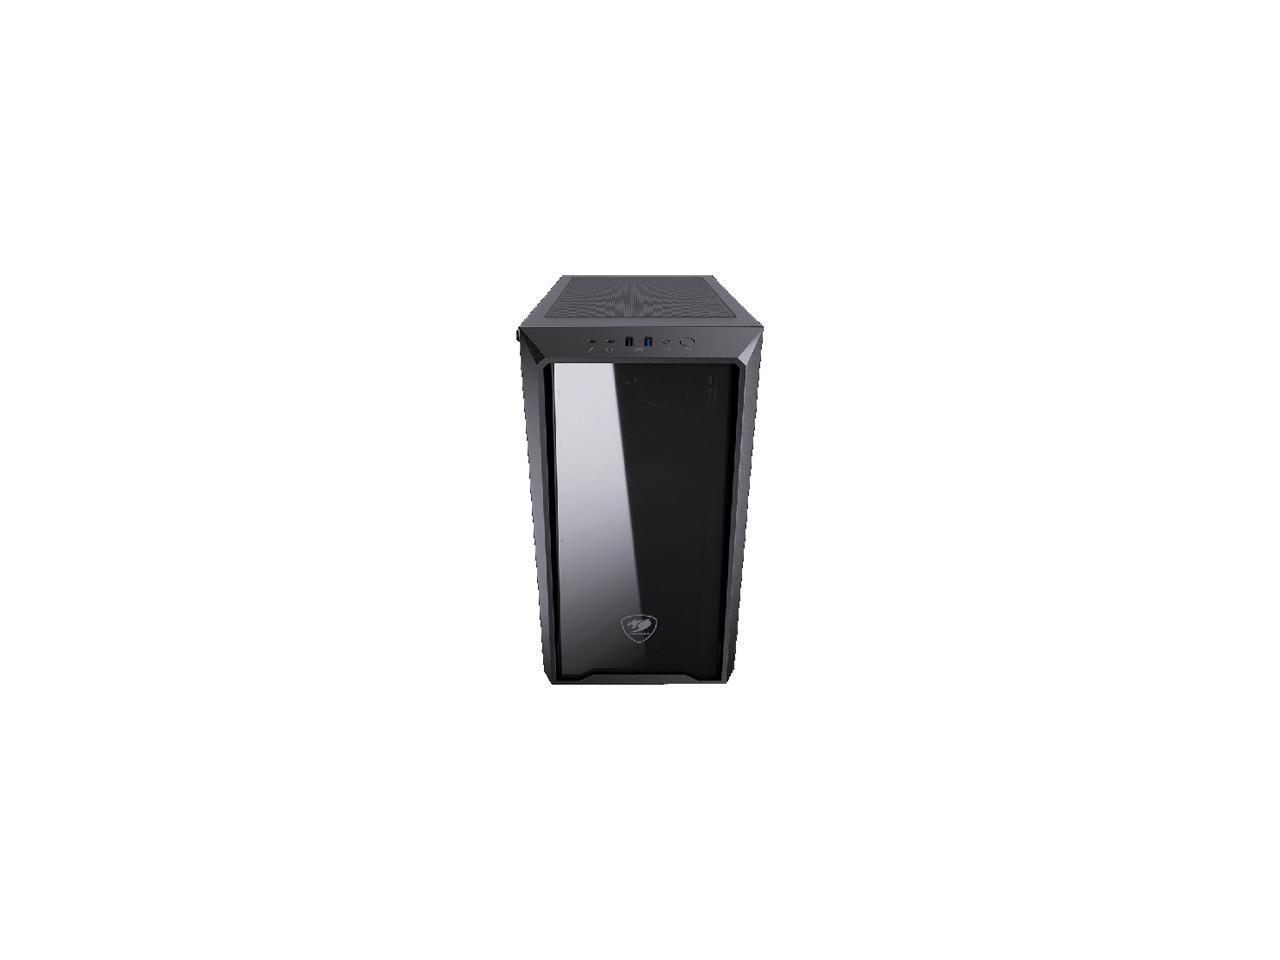 COUGAR MG120-G Black Elegant and Compact Mini Tower Case with Tempered Glass Side Window